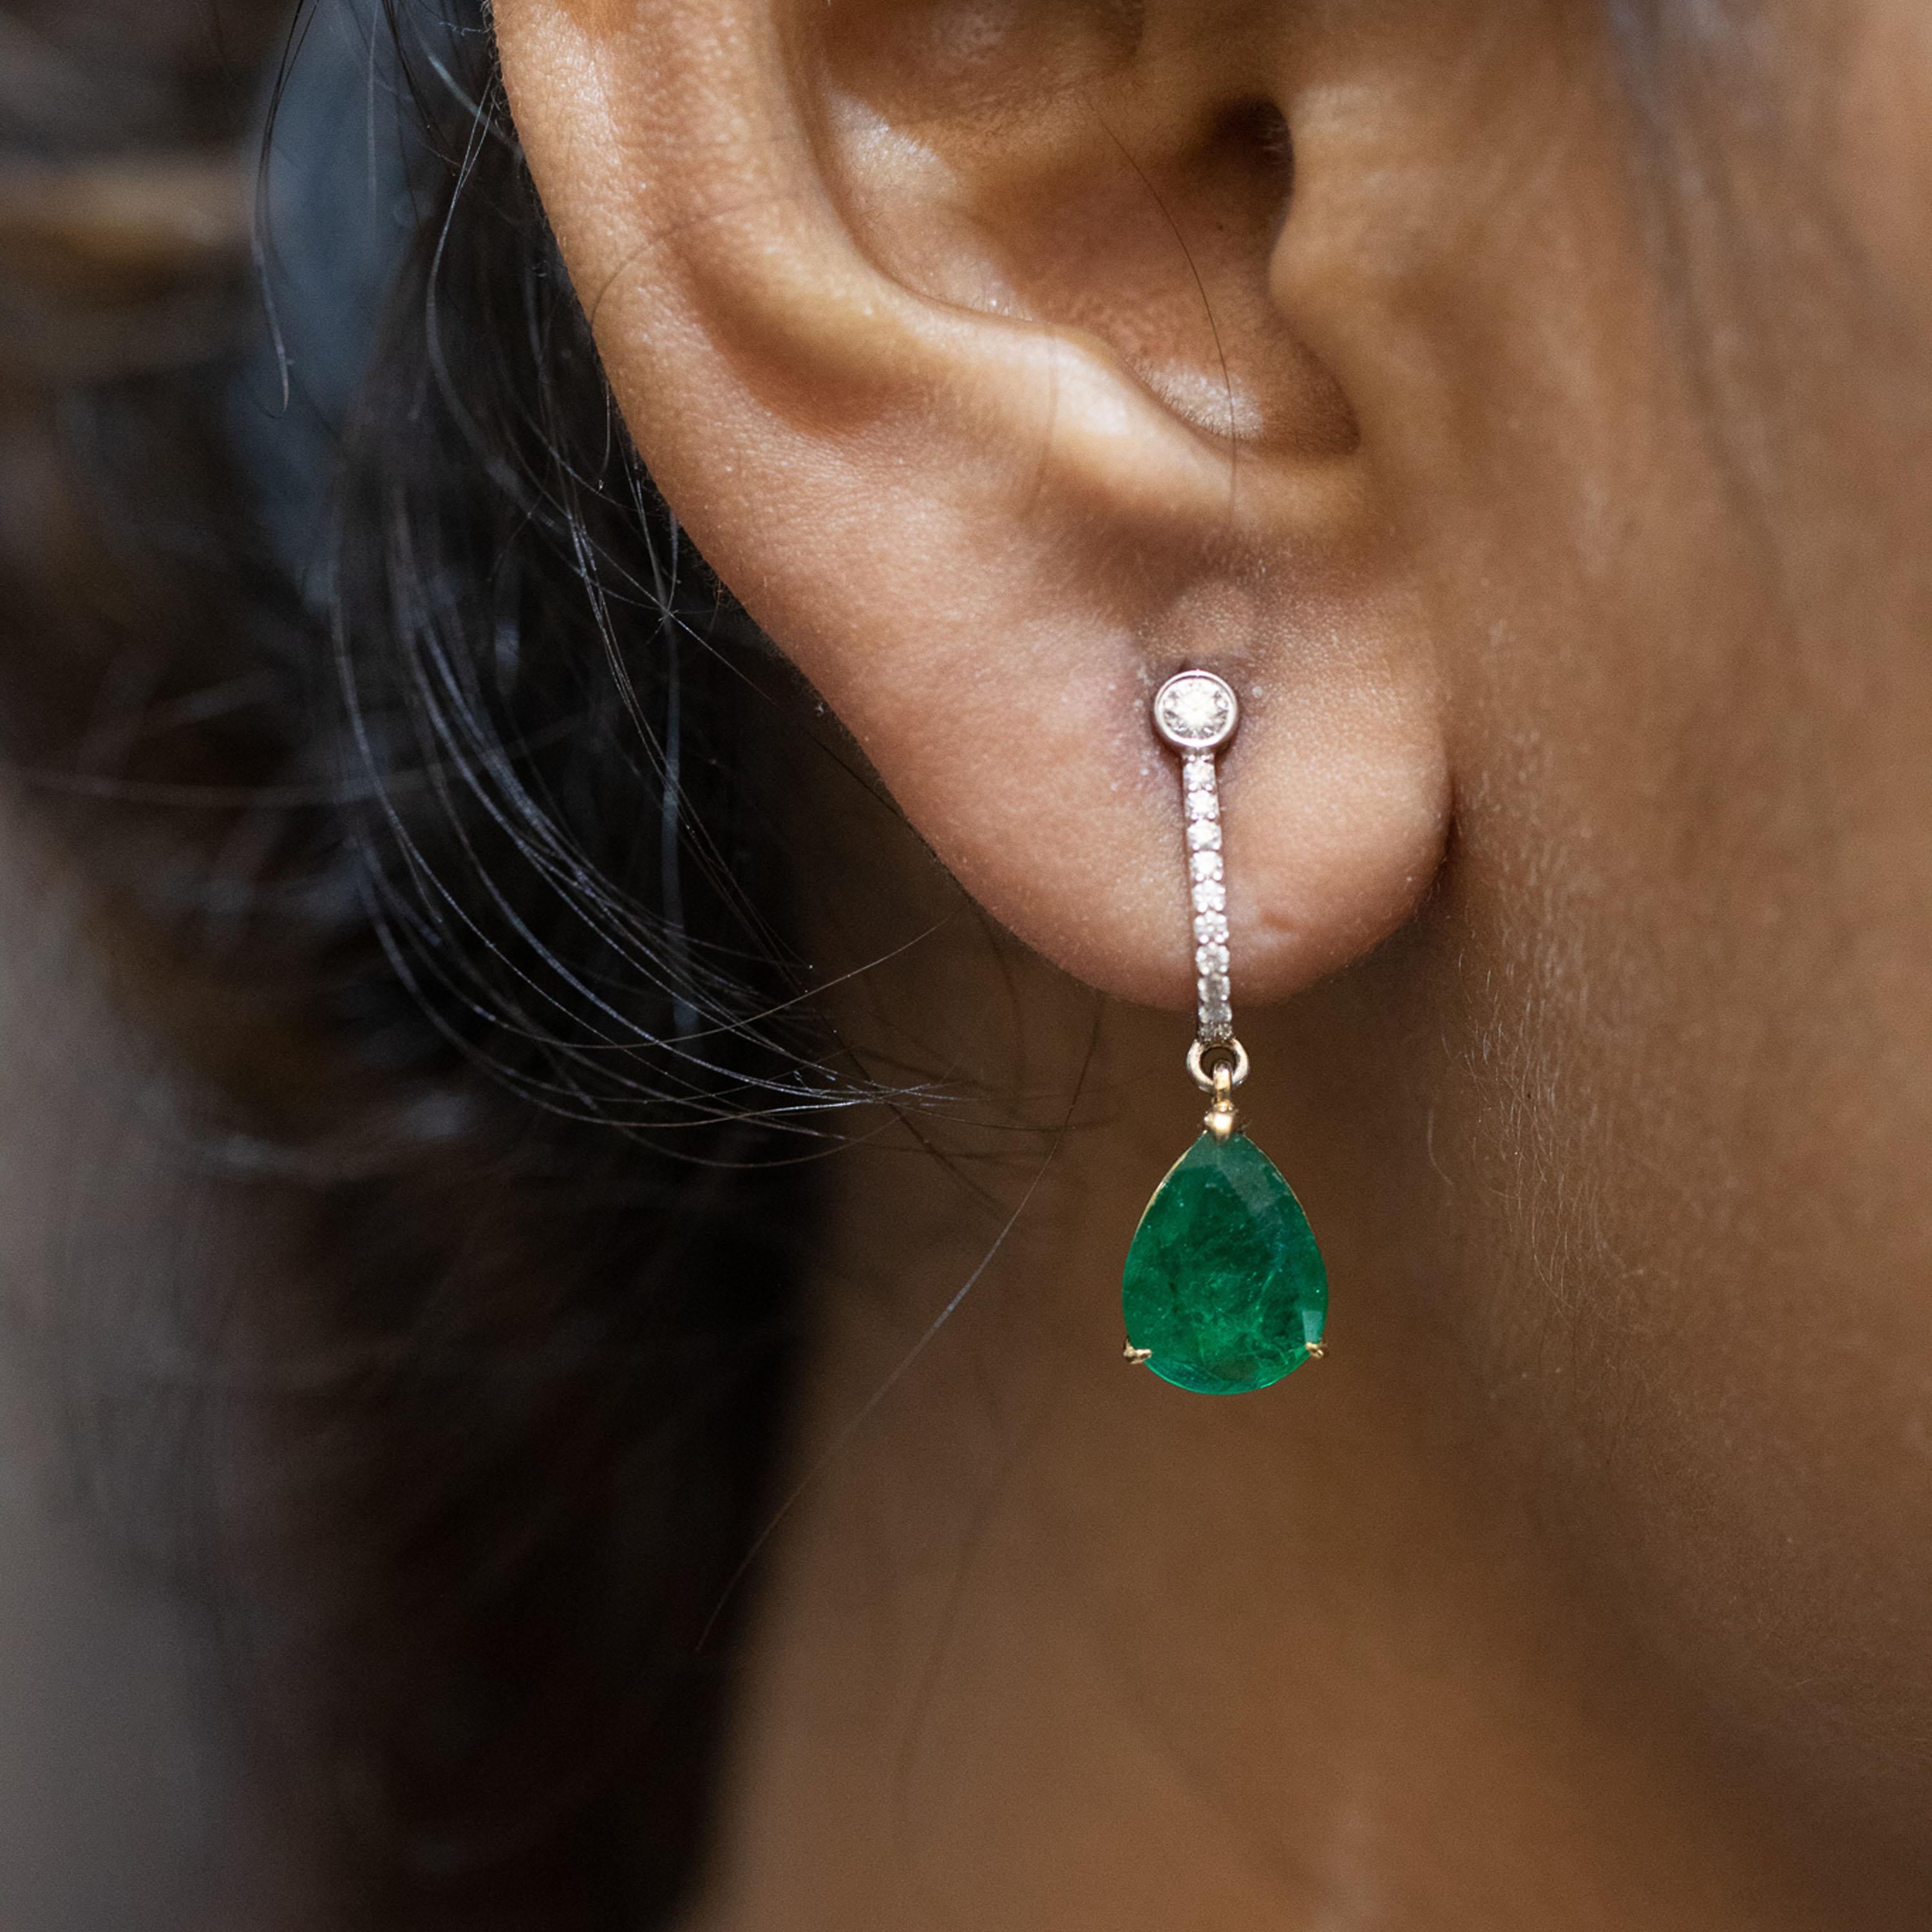 Gross Weight: 5.41 Grams
Diamond Weight: 0.29 cts
Emerald Weight: 6.07 cts
IGI Certification can be done on request.

Video of the product can be shared on request.

Dangling on diamond studded links, these pear shaped emeralds mirror the depths and